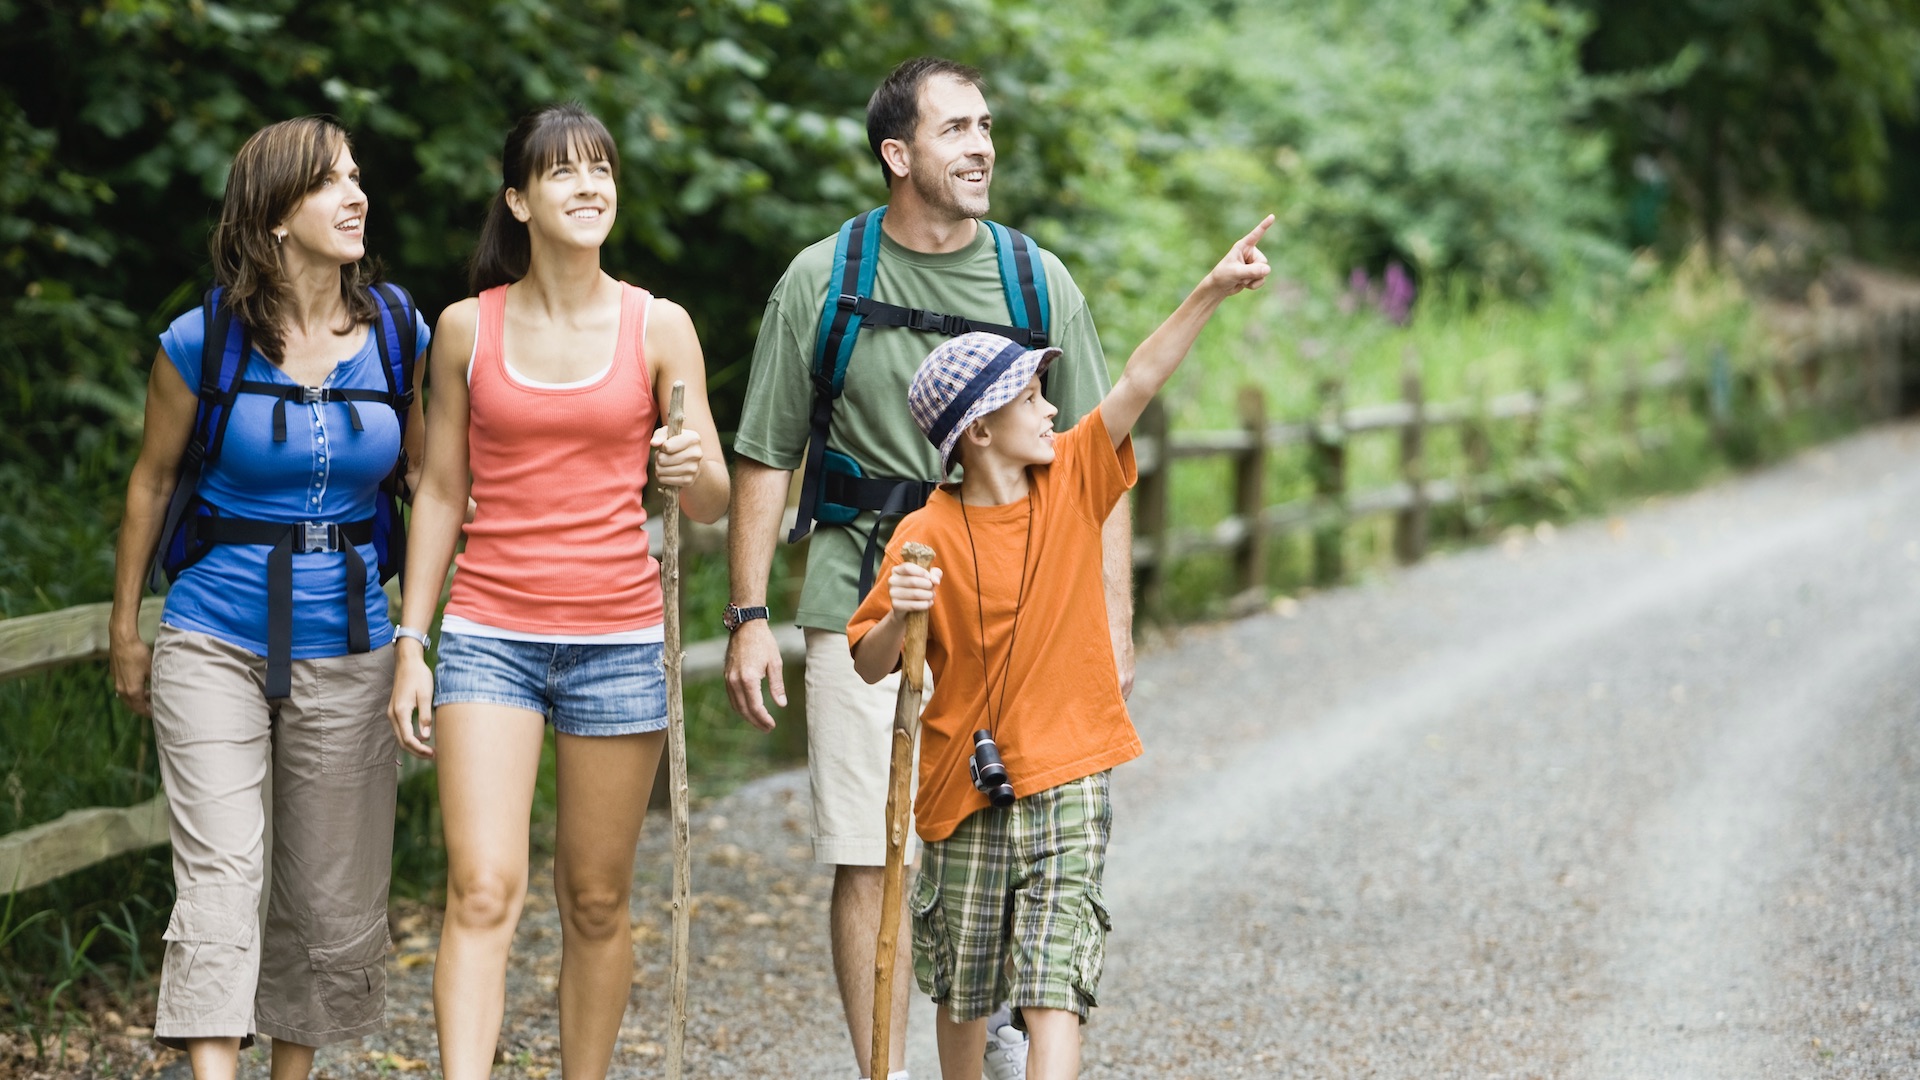 3 Tips For Planning A Family Hike That Everyone Will Enjoy